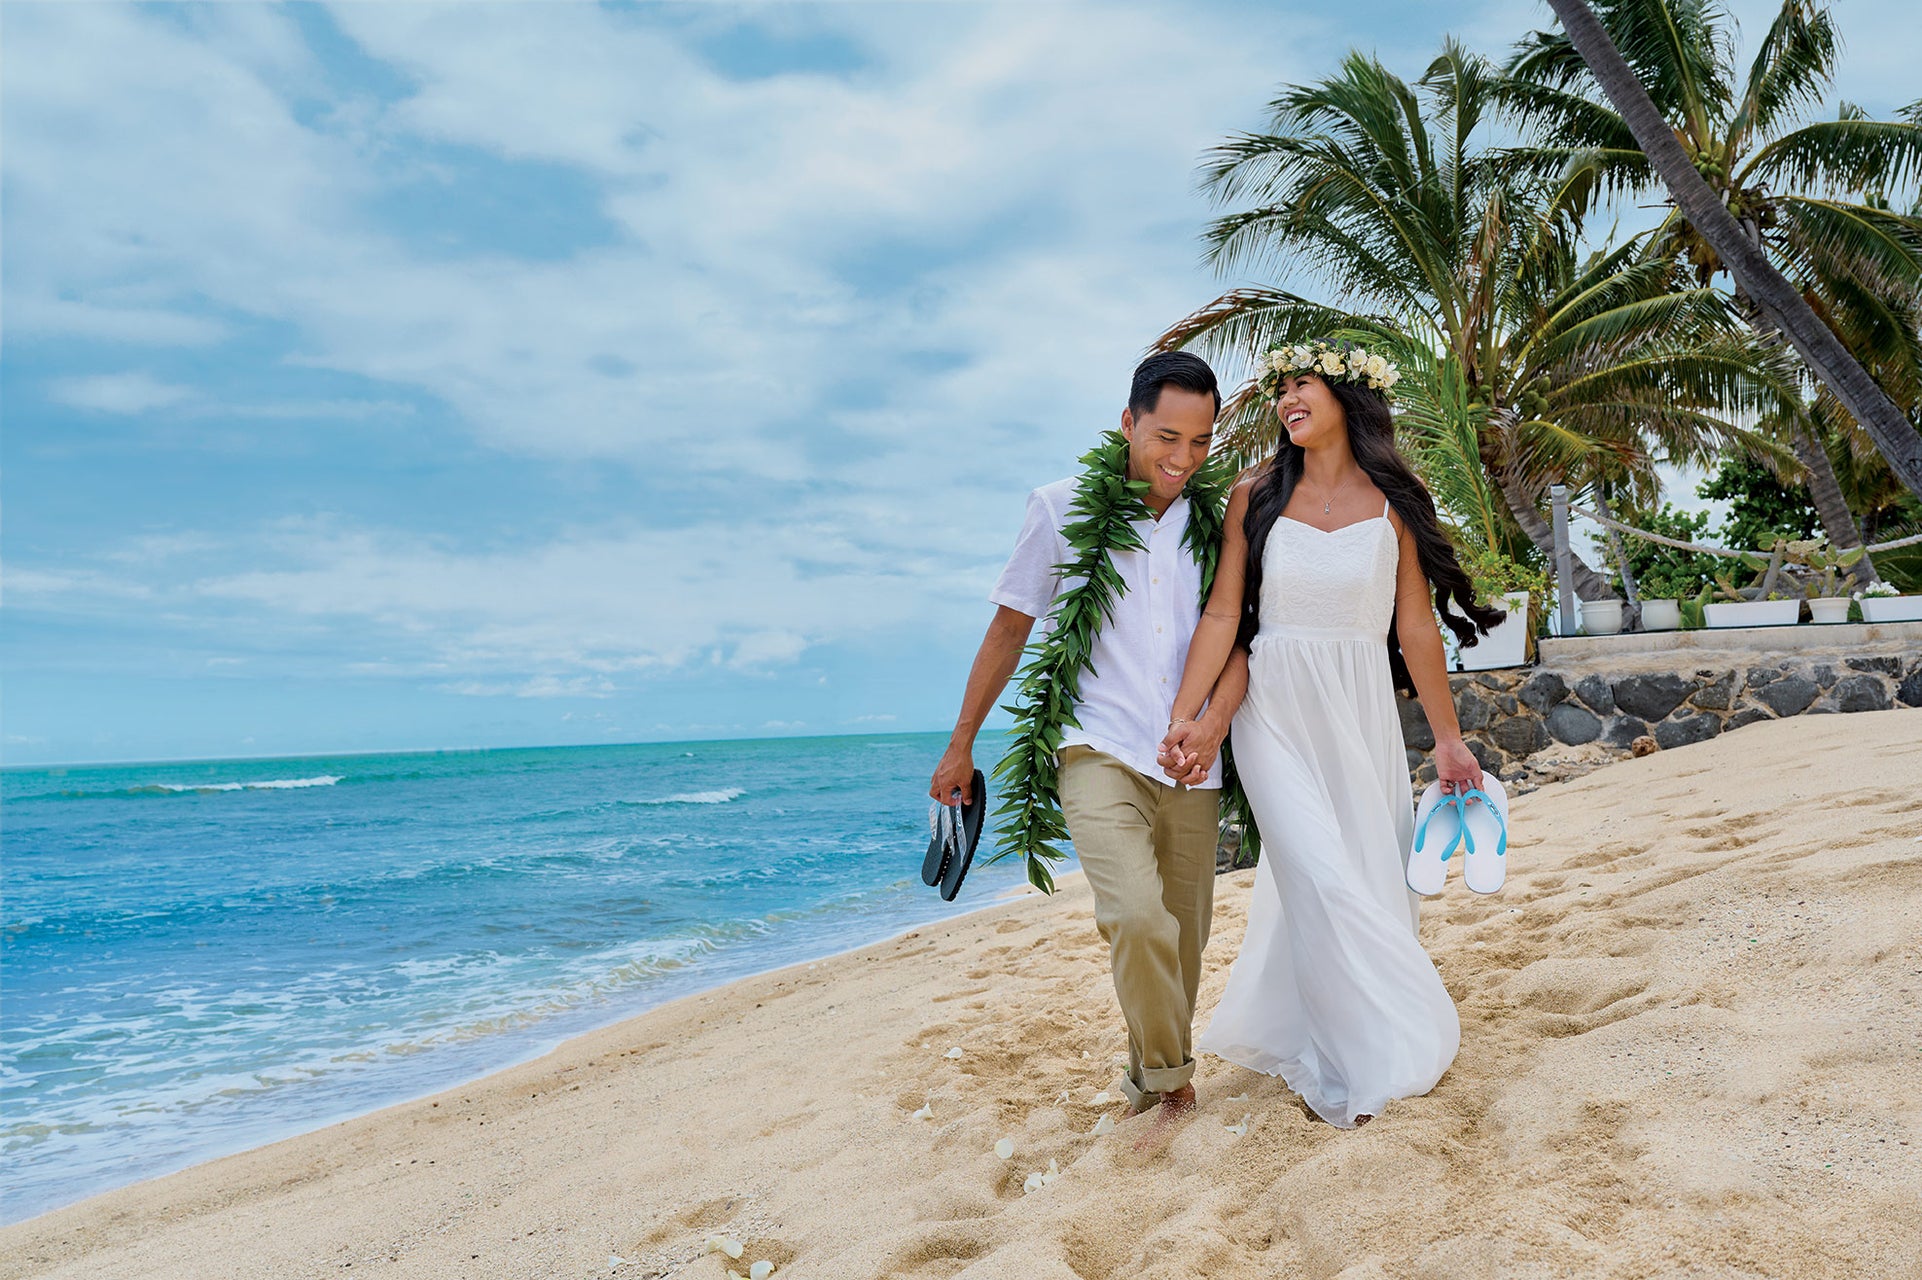 Wedding couple in white on a beach carrying Locals slippahs